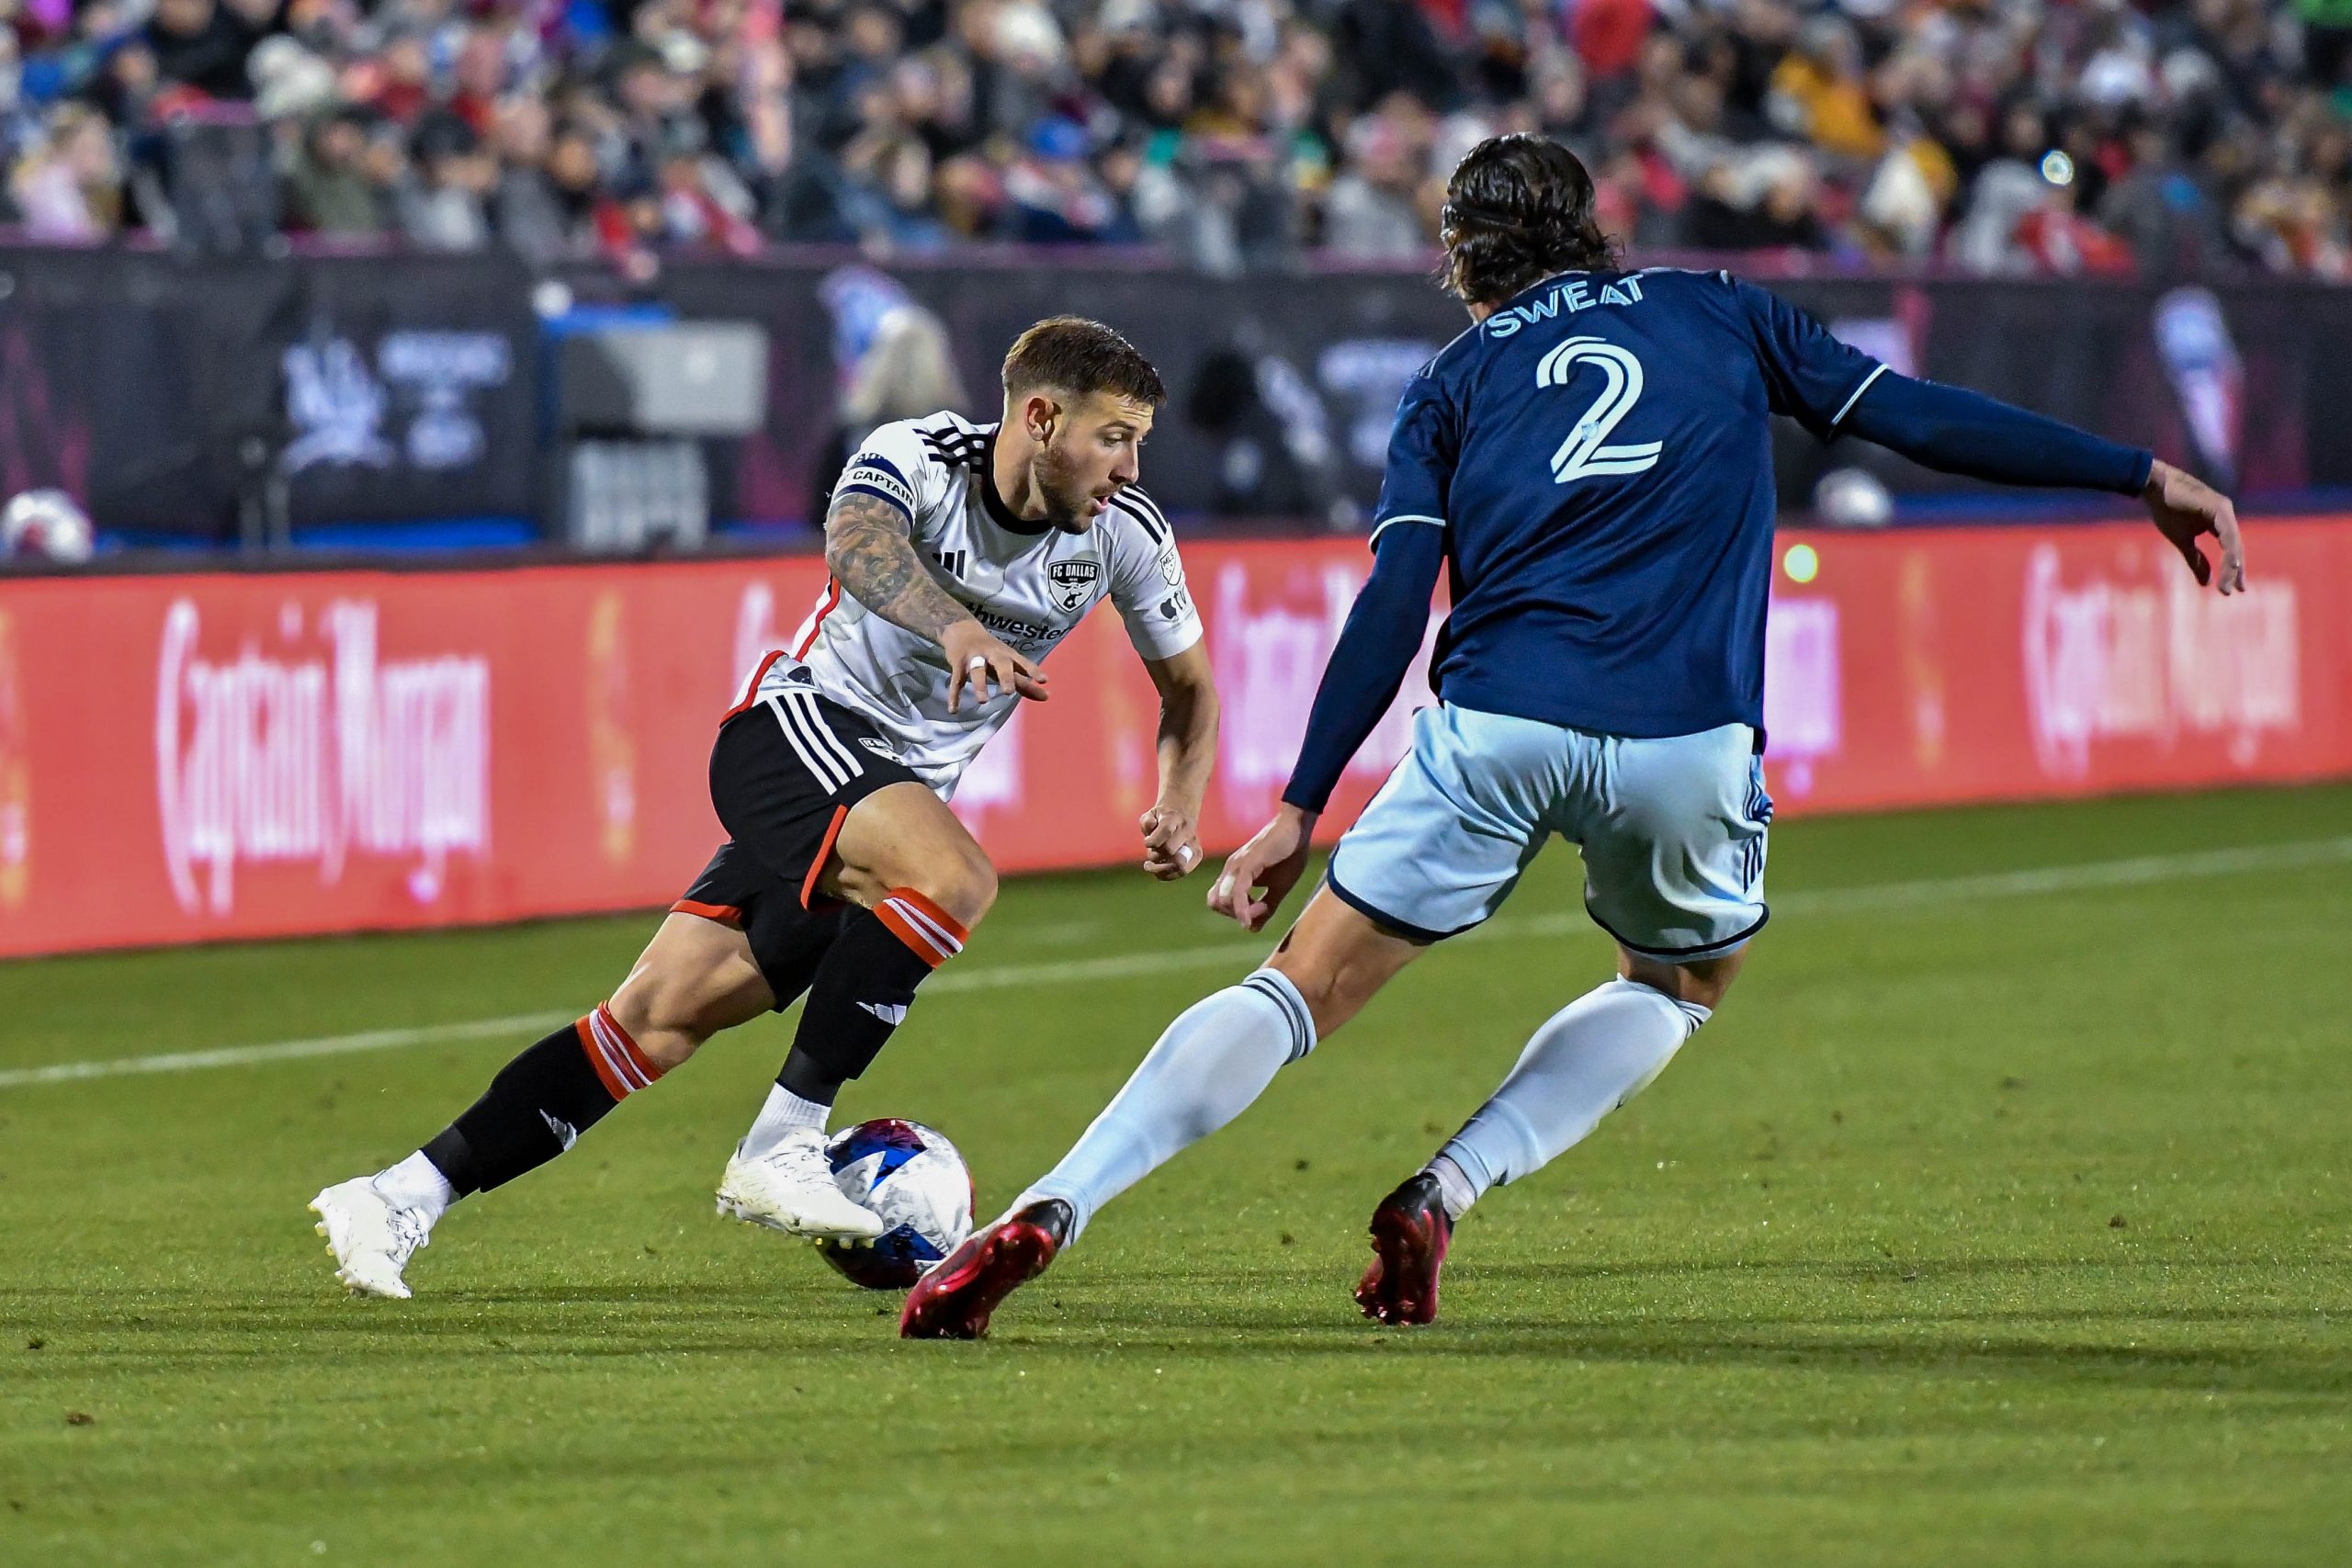 Paul Arriola dribbles past Sporting KC defender Ben Sweat in the MLS match on Saturday, March 18, 2023, at Toyota Stadium. (Daniel McCullough, 3rd Degree)